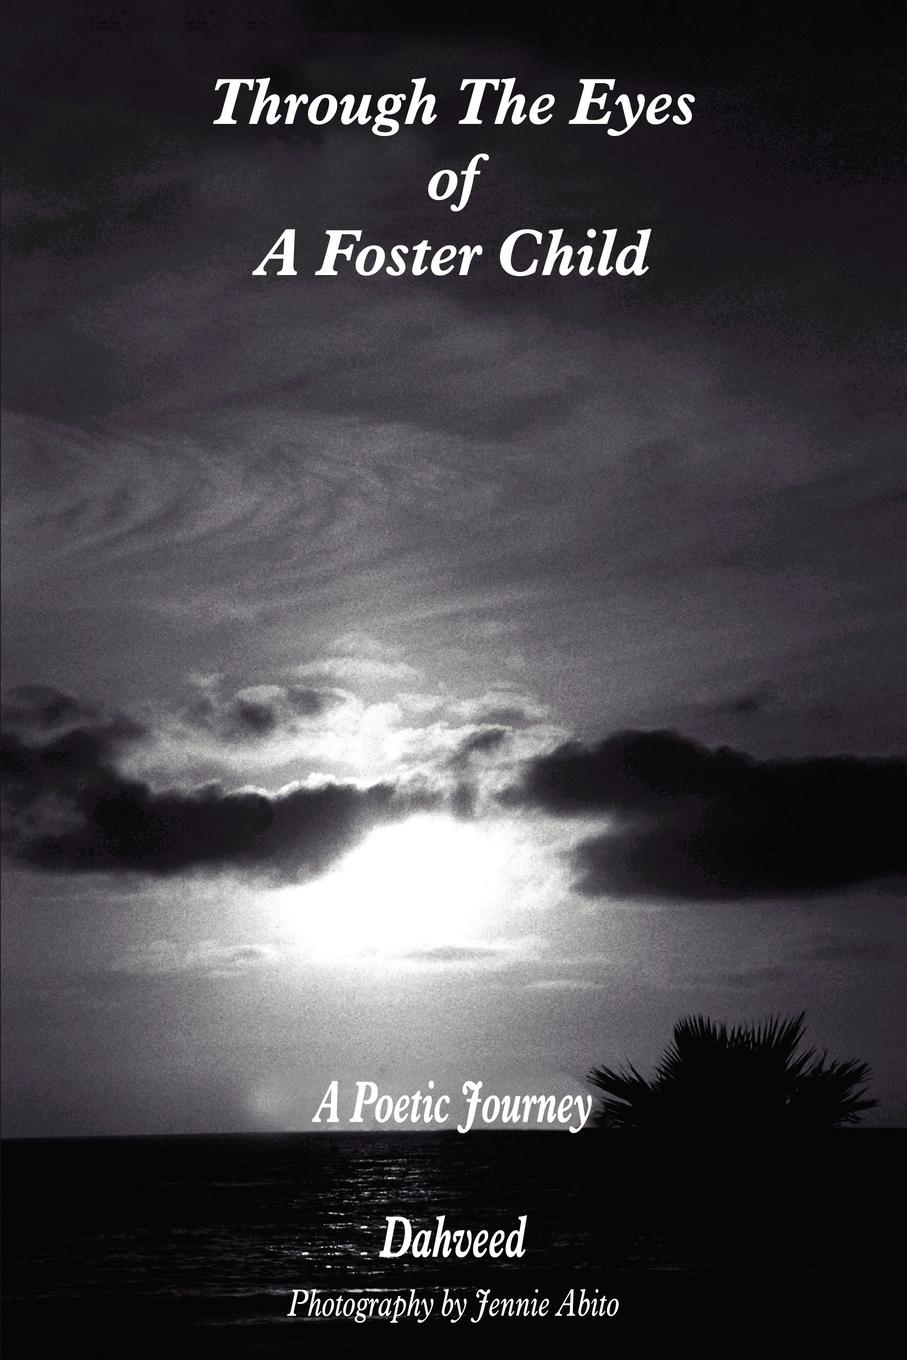 Through The Eyes of A Foster Child - Dahveed